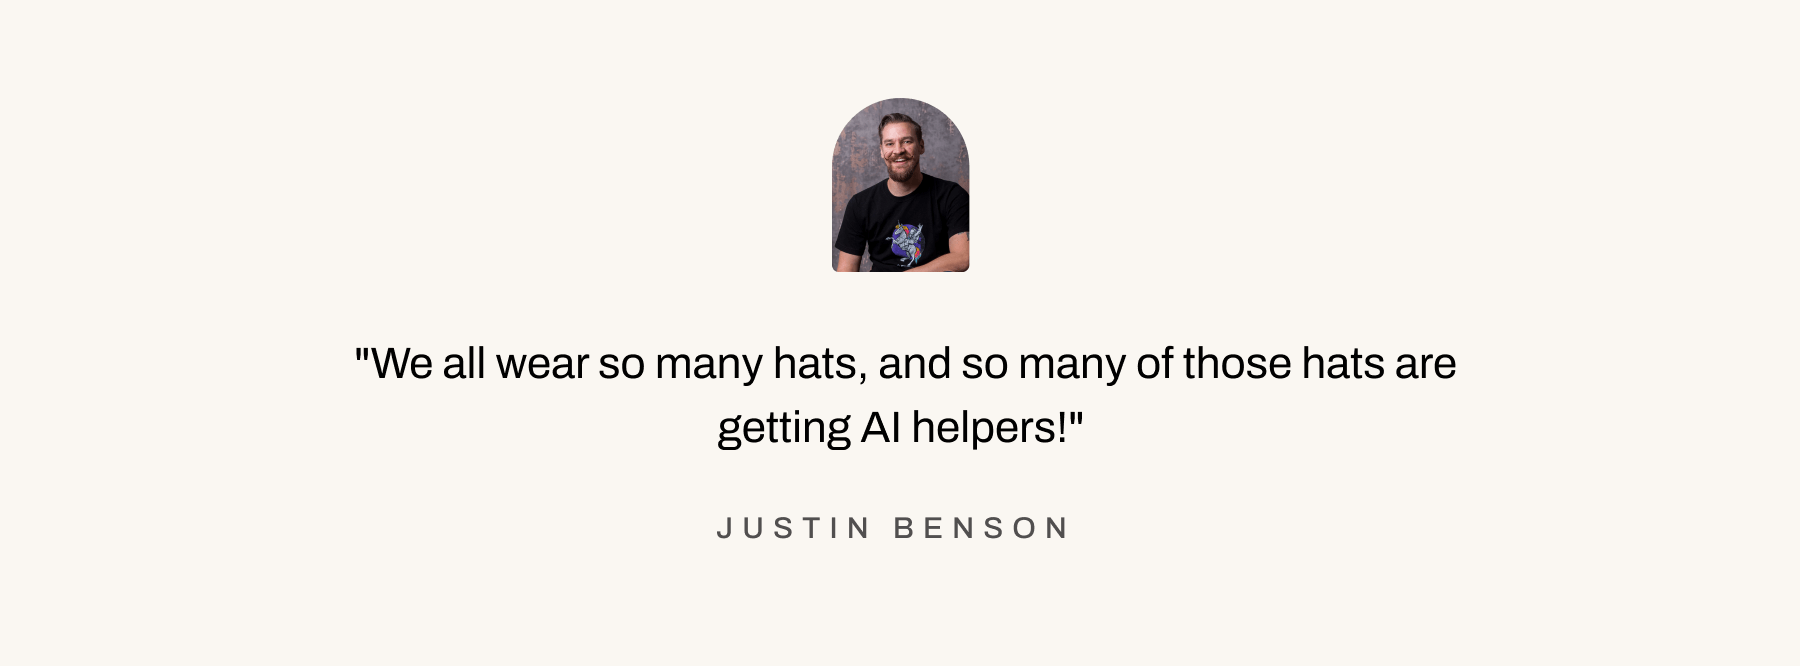 Justin Benson says AI is here to help us